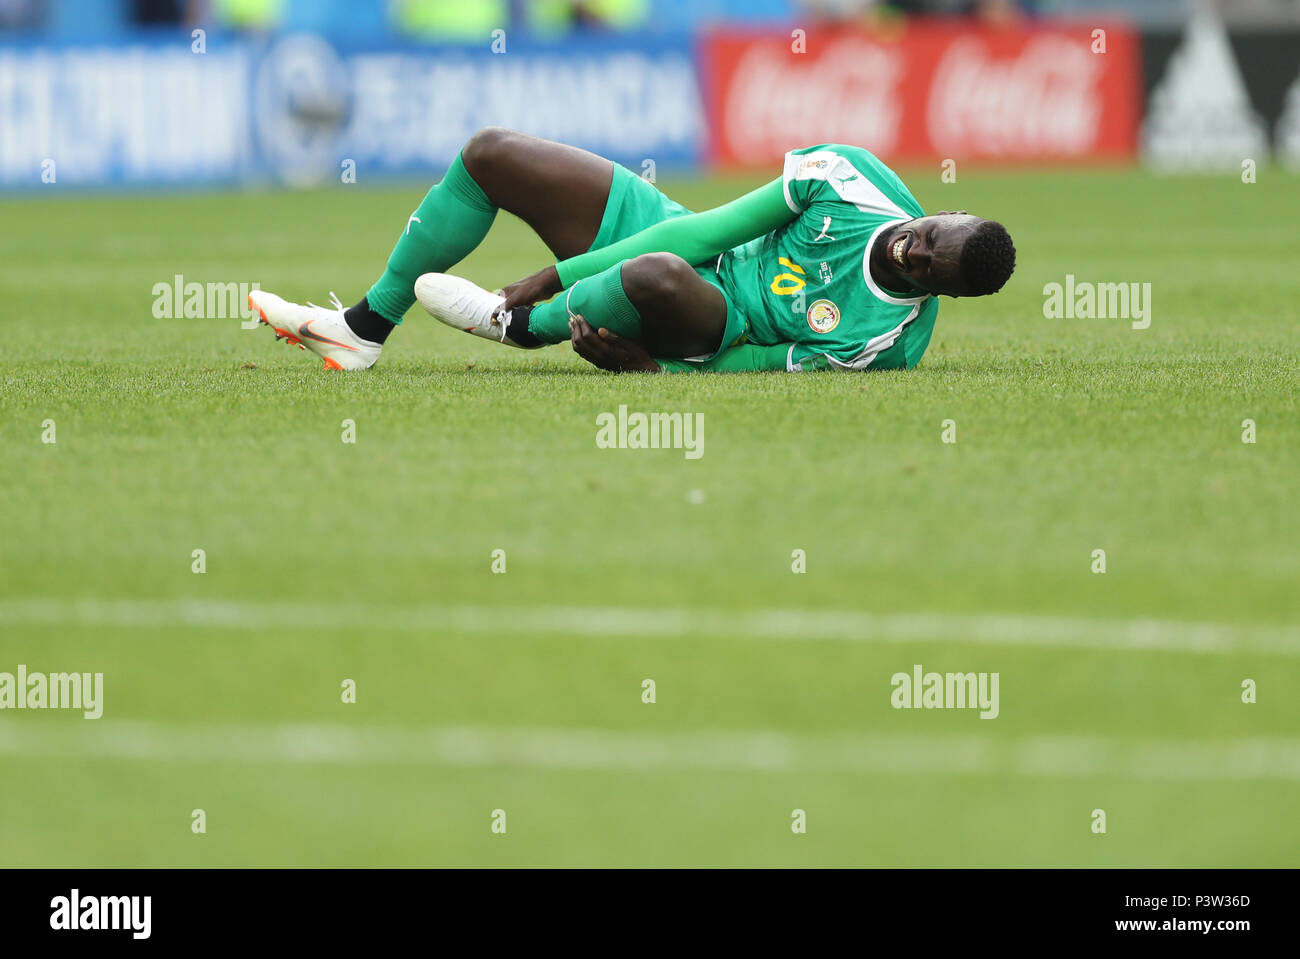 Moscow, Russia. 19th June, 2018. Sadio Mane of Senegal sustains injury during a Group H match between Poland and Senegal at the 2018 FIFA World Cup in Moscow, Russia, June 19, 2018. Senegal won 2-1. Credit: Xu Zijian/Xinhua/Alamy Live News Stock Photo